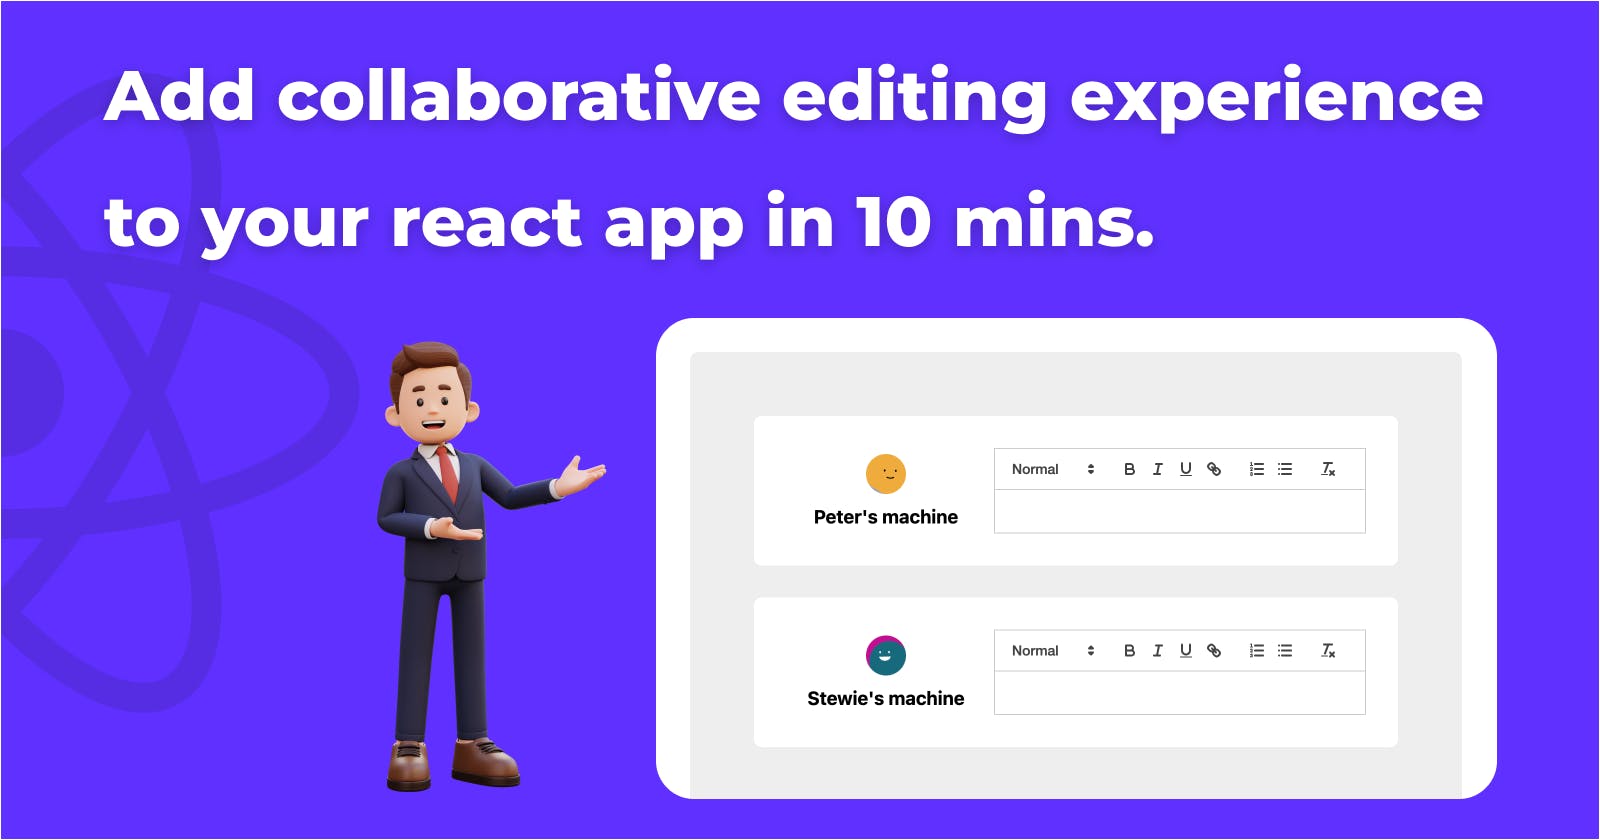 Add collaborative editing experience to your react app in 10 mins.